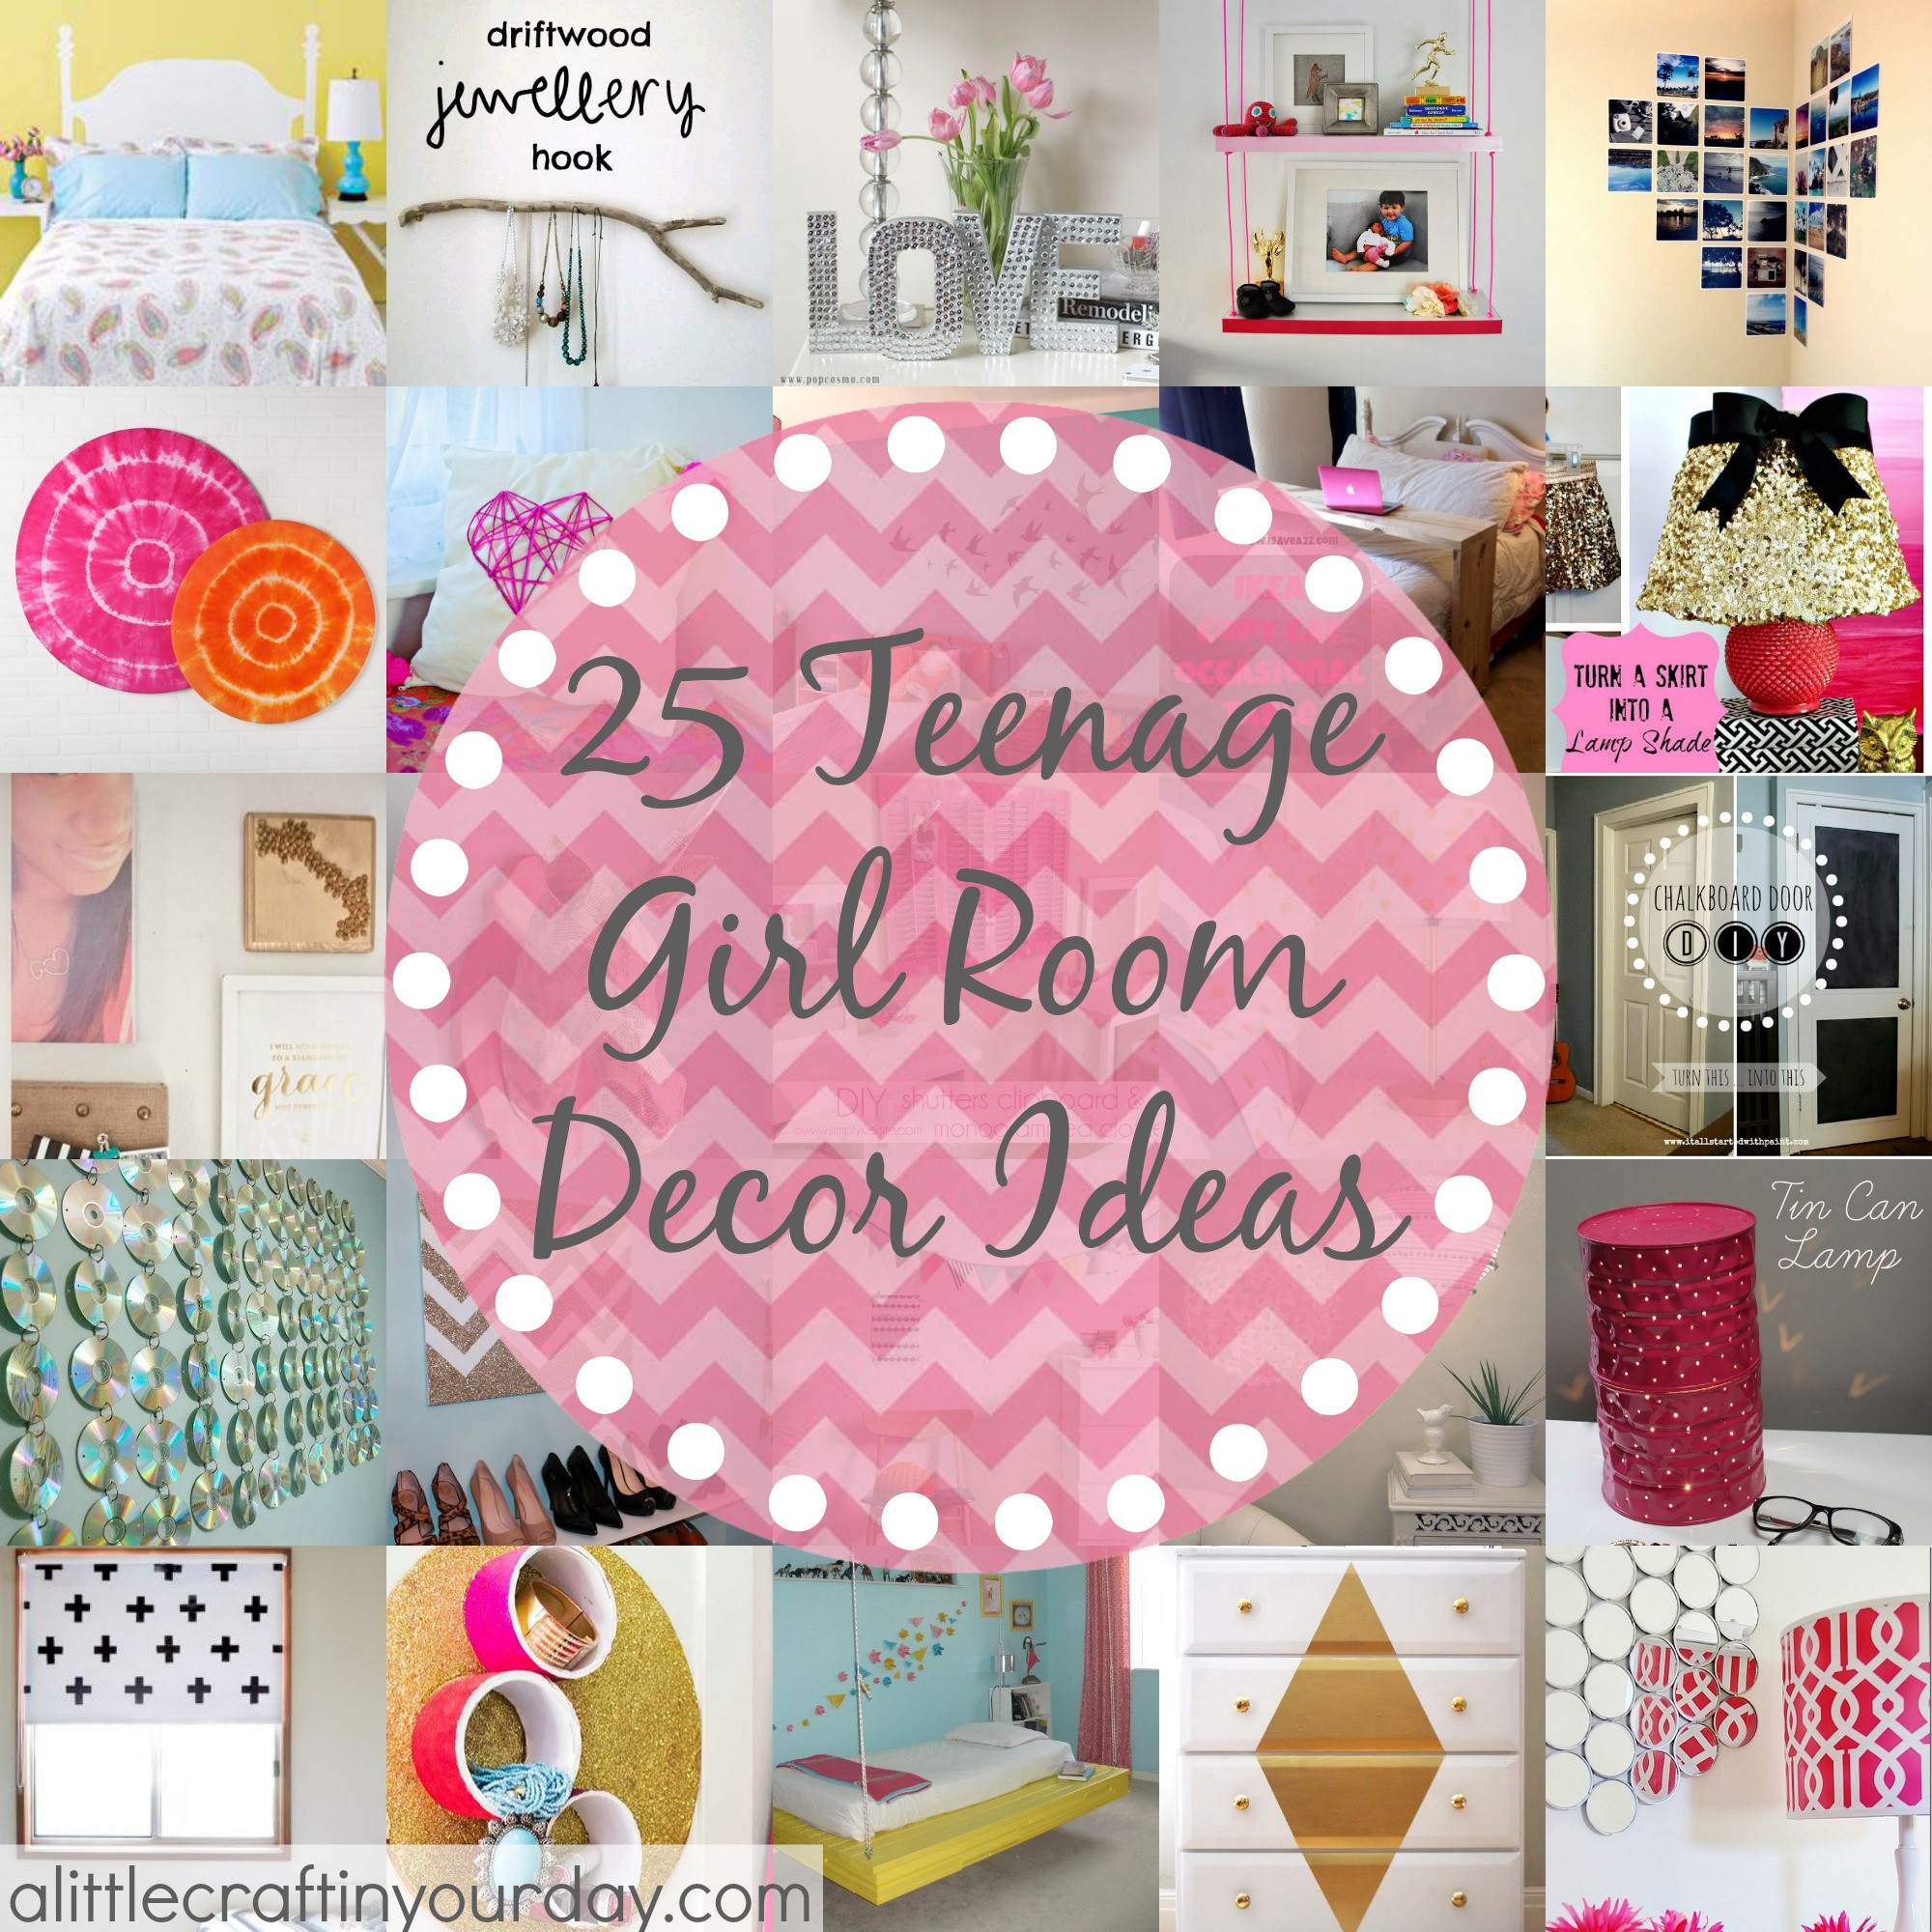 DIY Room Decor Ideas For Girls
 25 More Teenage Girl Room Decor Ideas A Little Craft In